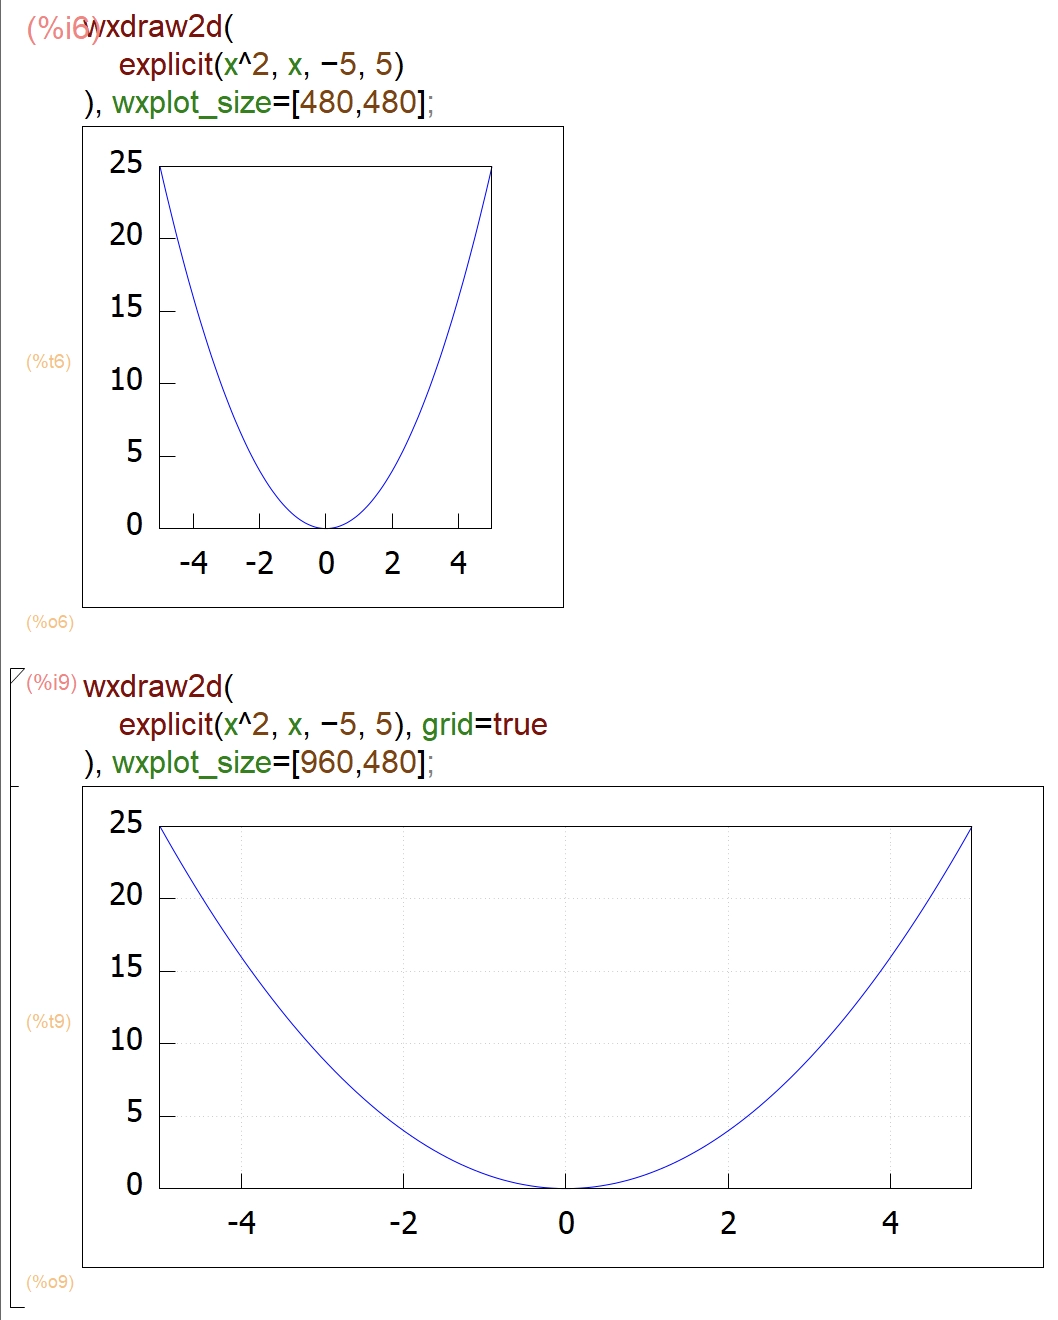 Plot equations - play with plot size